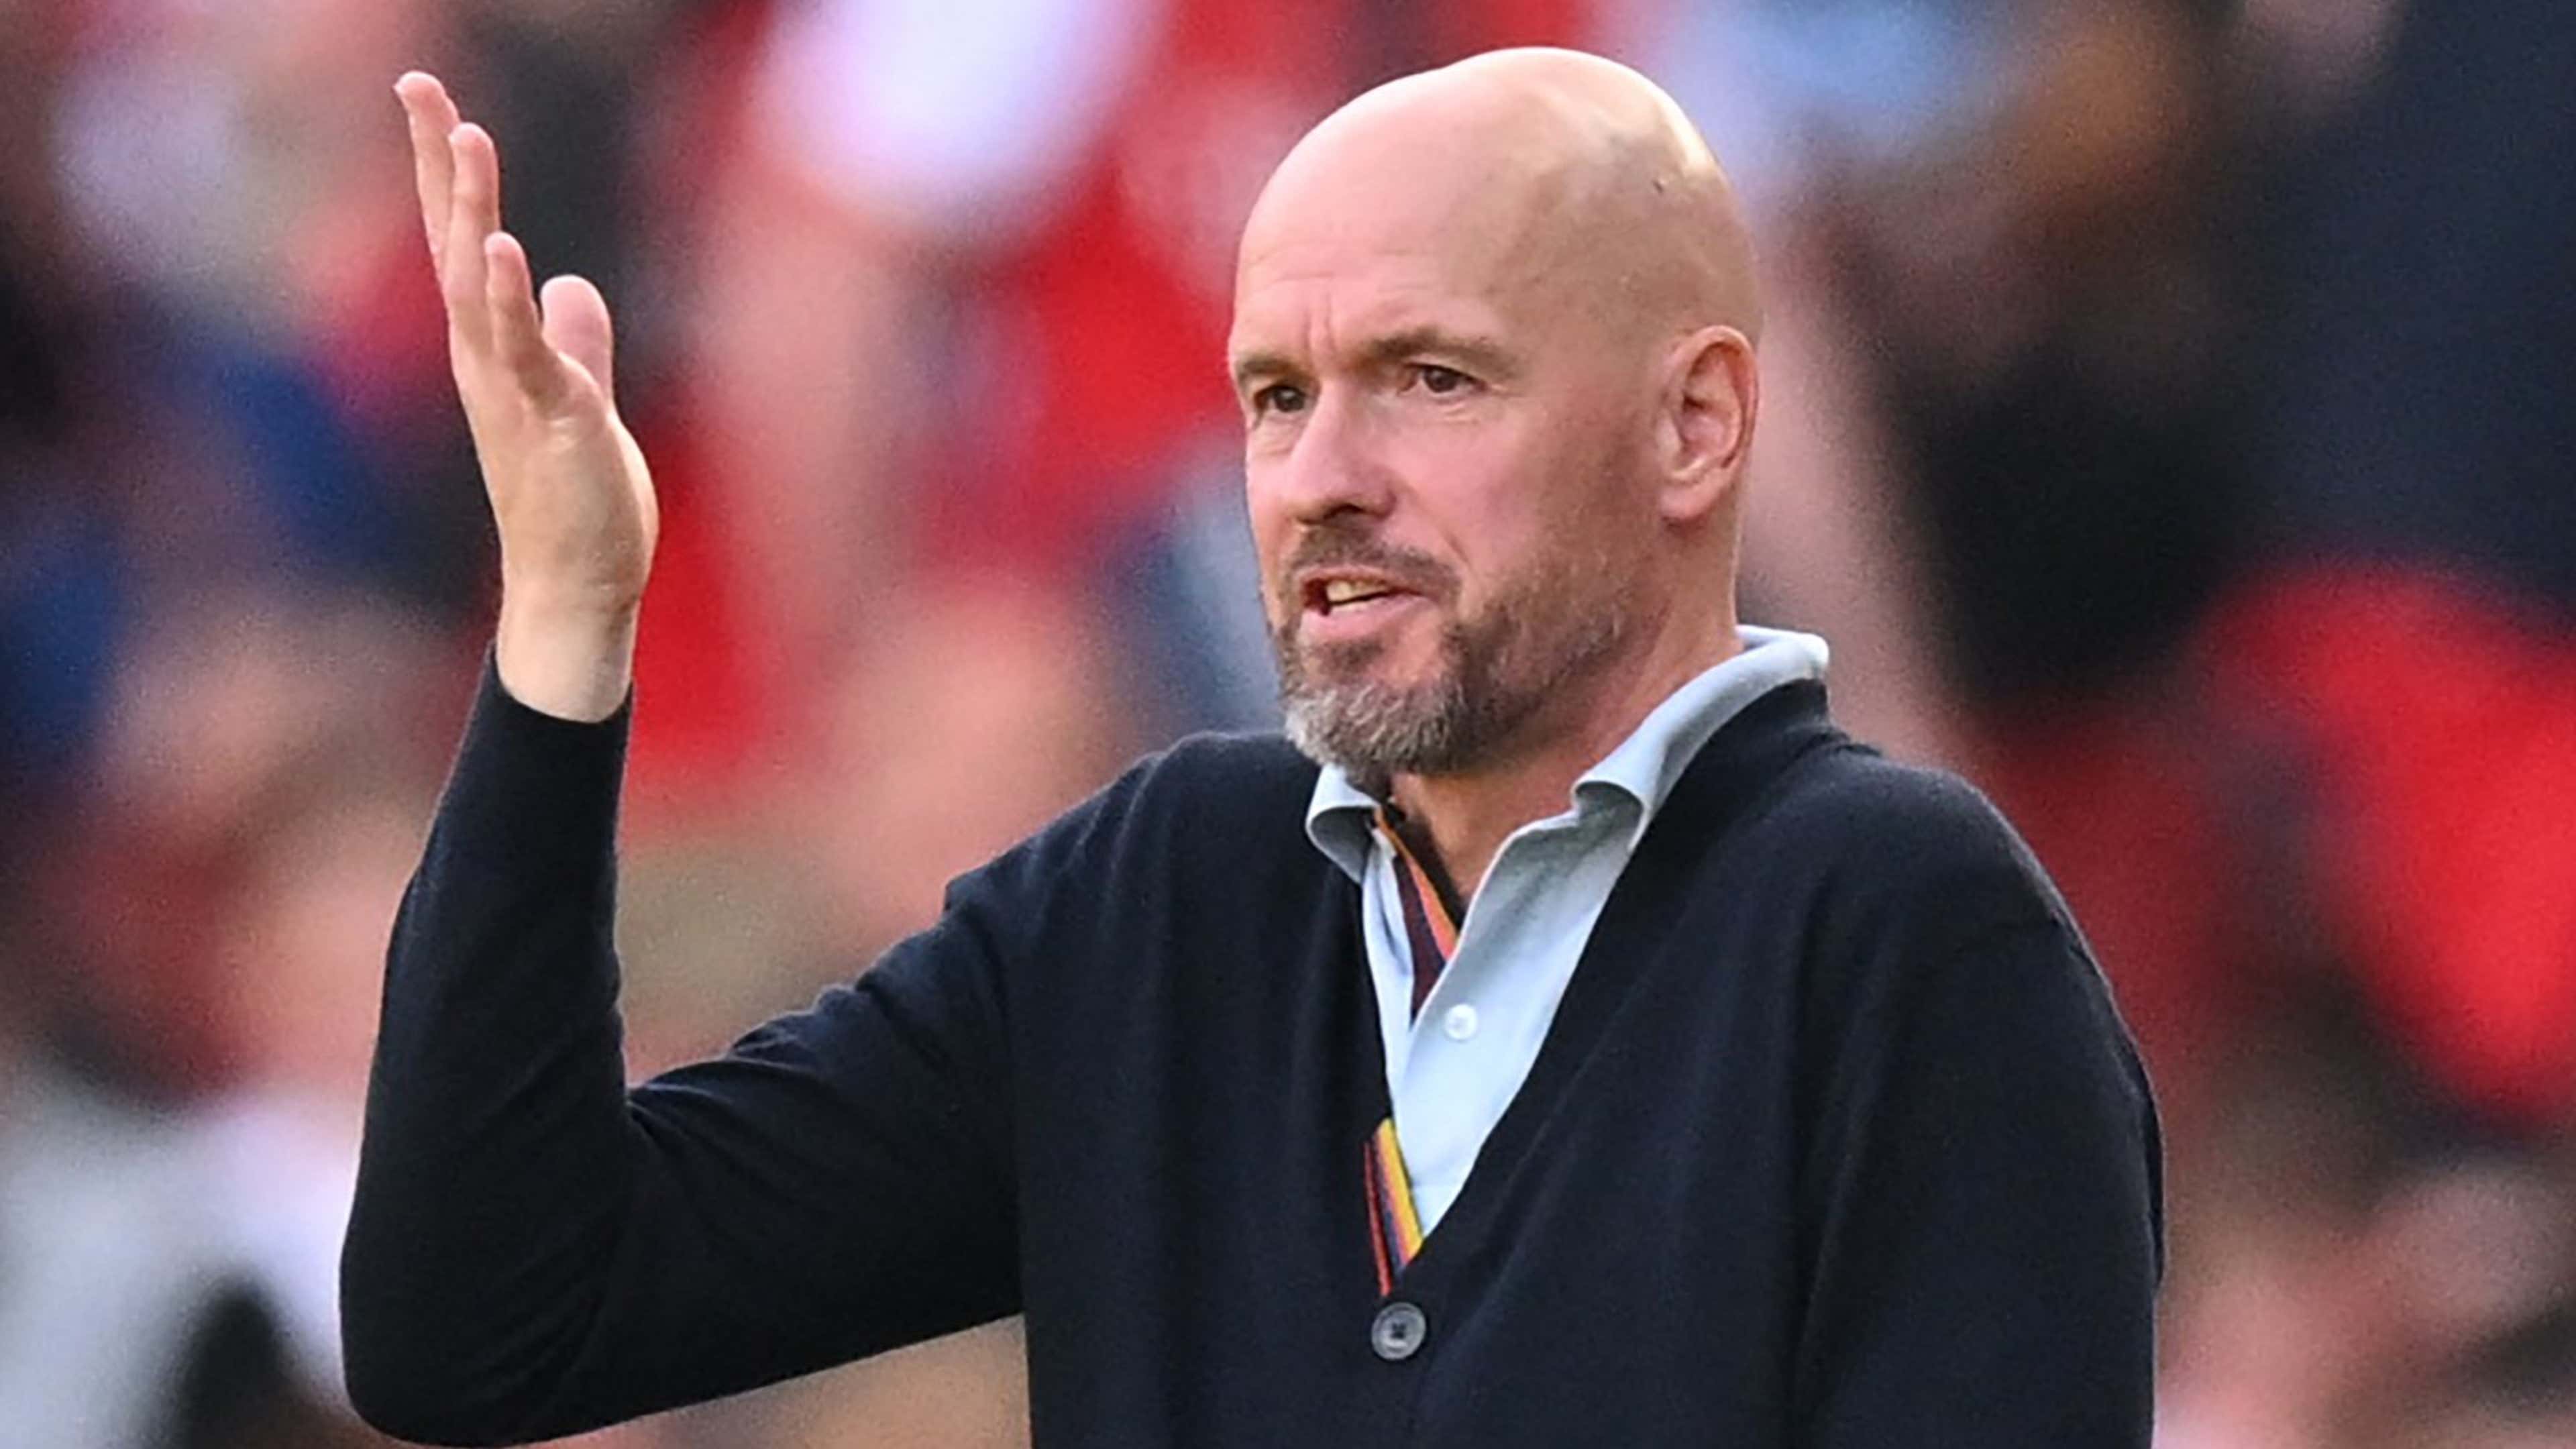 Man Utd are worse than ever under Erik ten Hag - but another managerial  change won't fix toxic dressing room culture | Goal.com